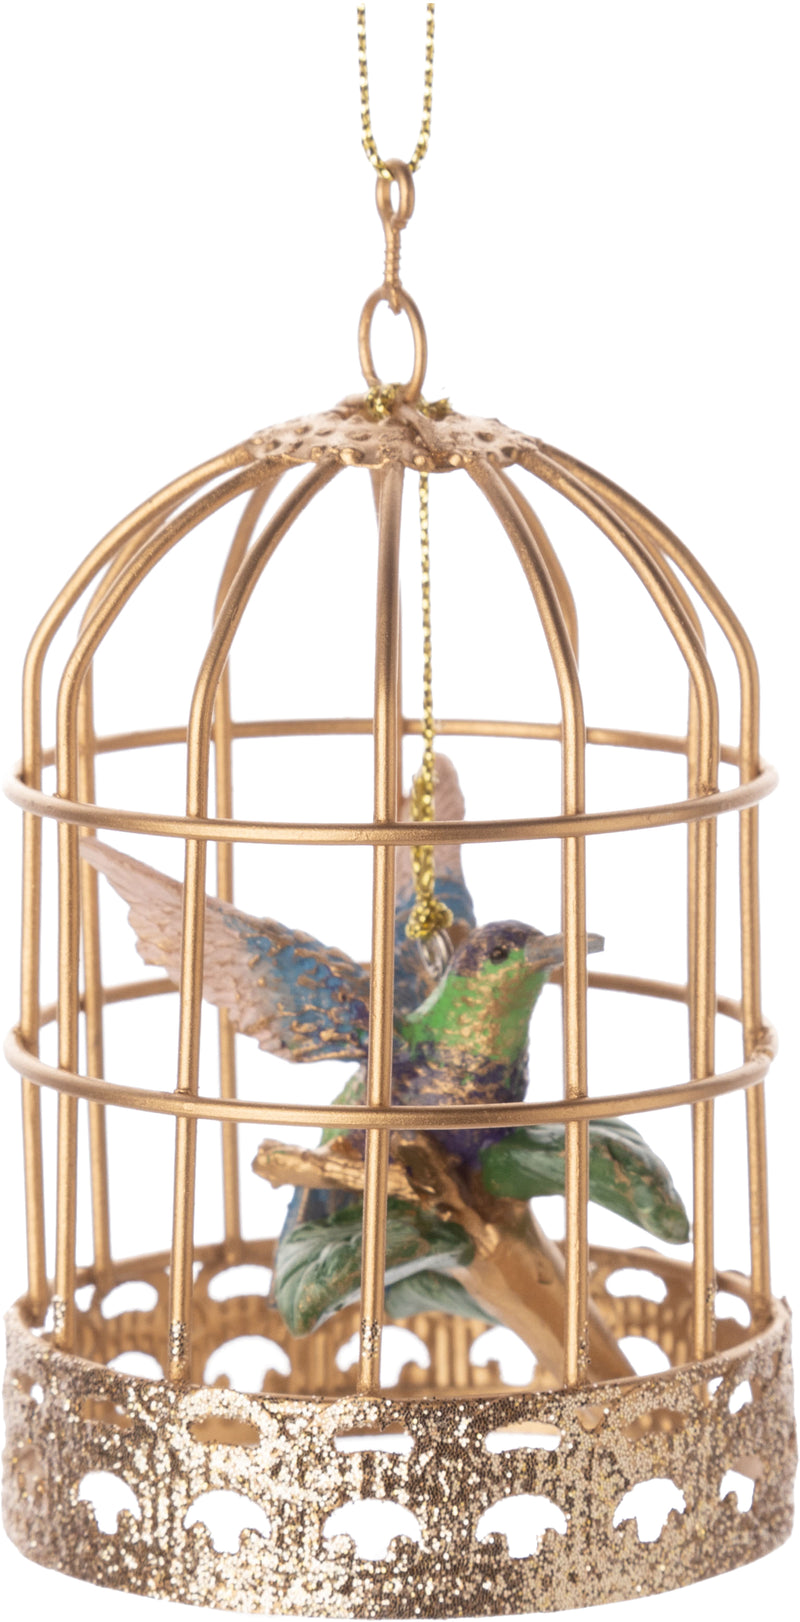 Humming Bird in Gold Cage Ornament - The Country Christmas Loft